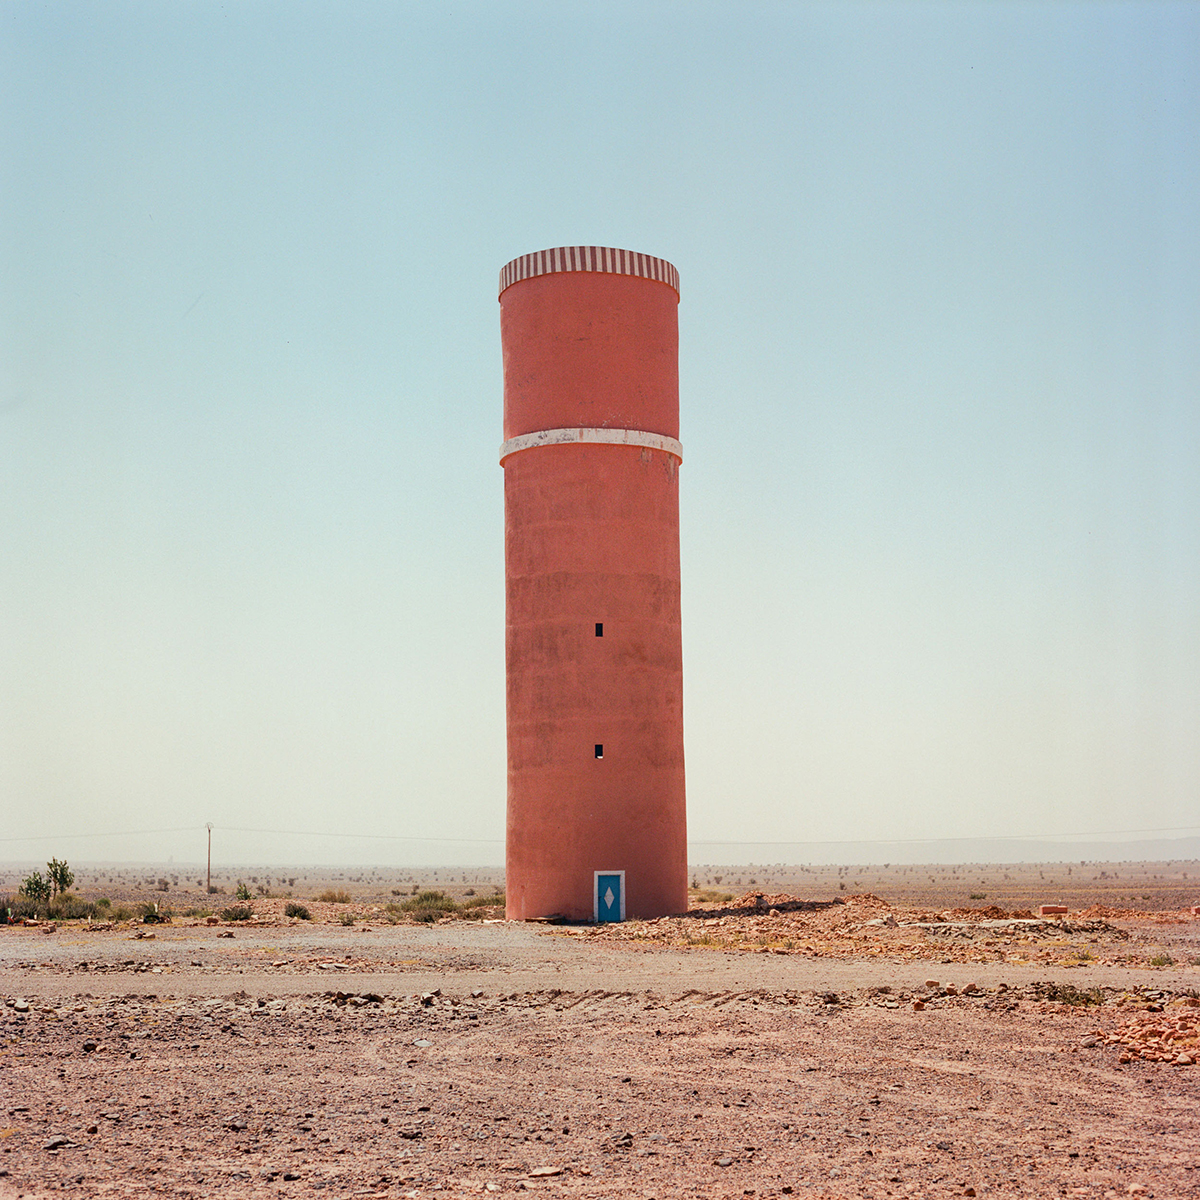 A water tower in the desert